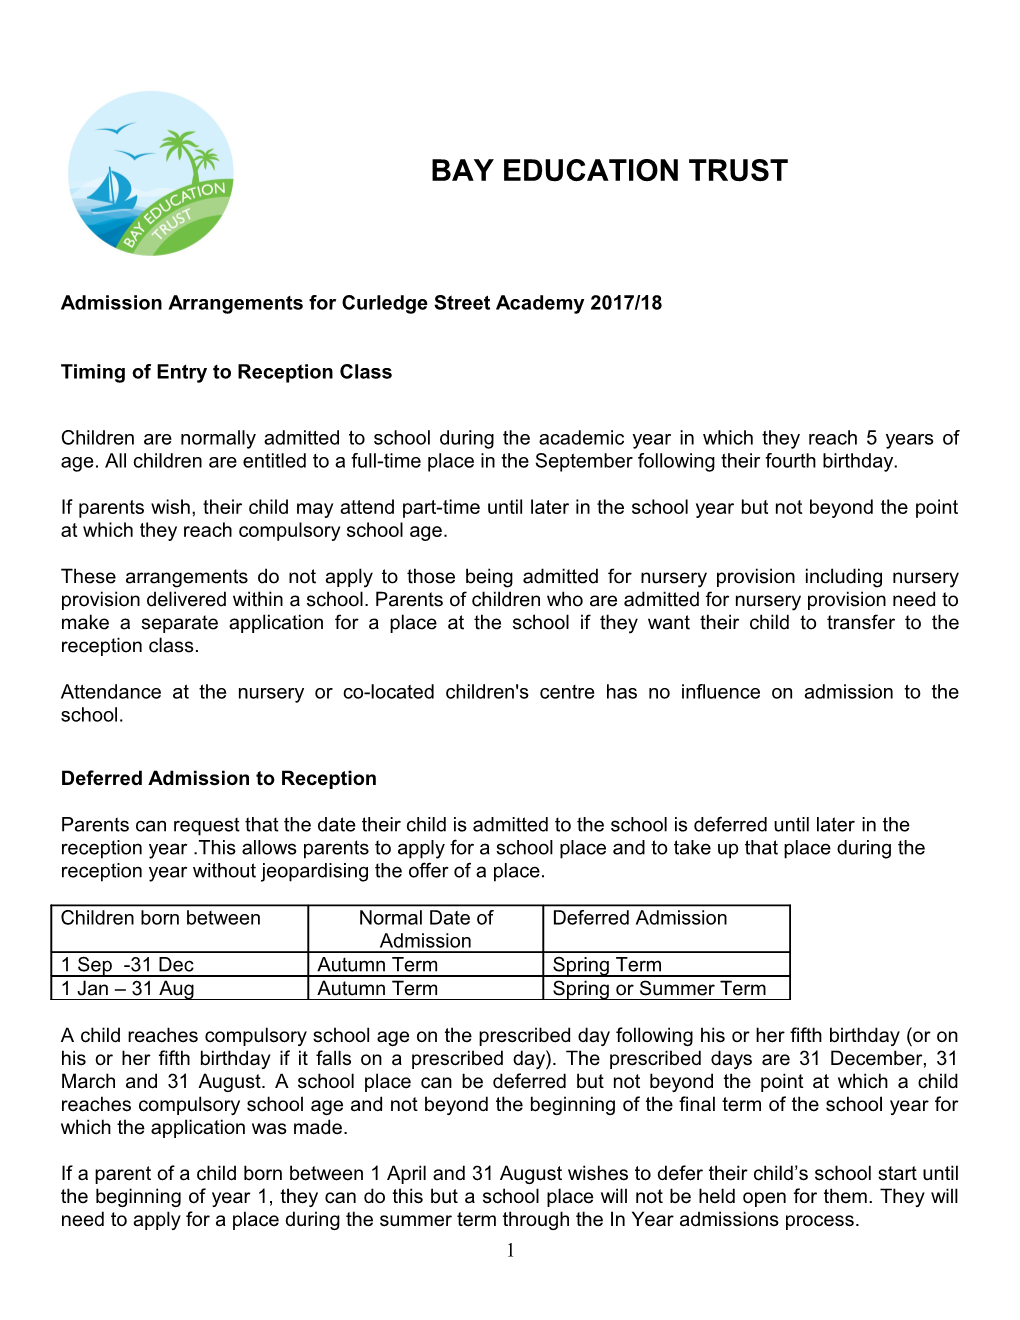 Admission Arrangements for Community and Voluntary Controlled Primary Schools in Torbay 2011/12